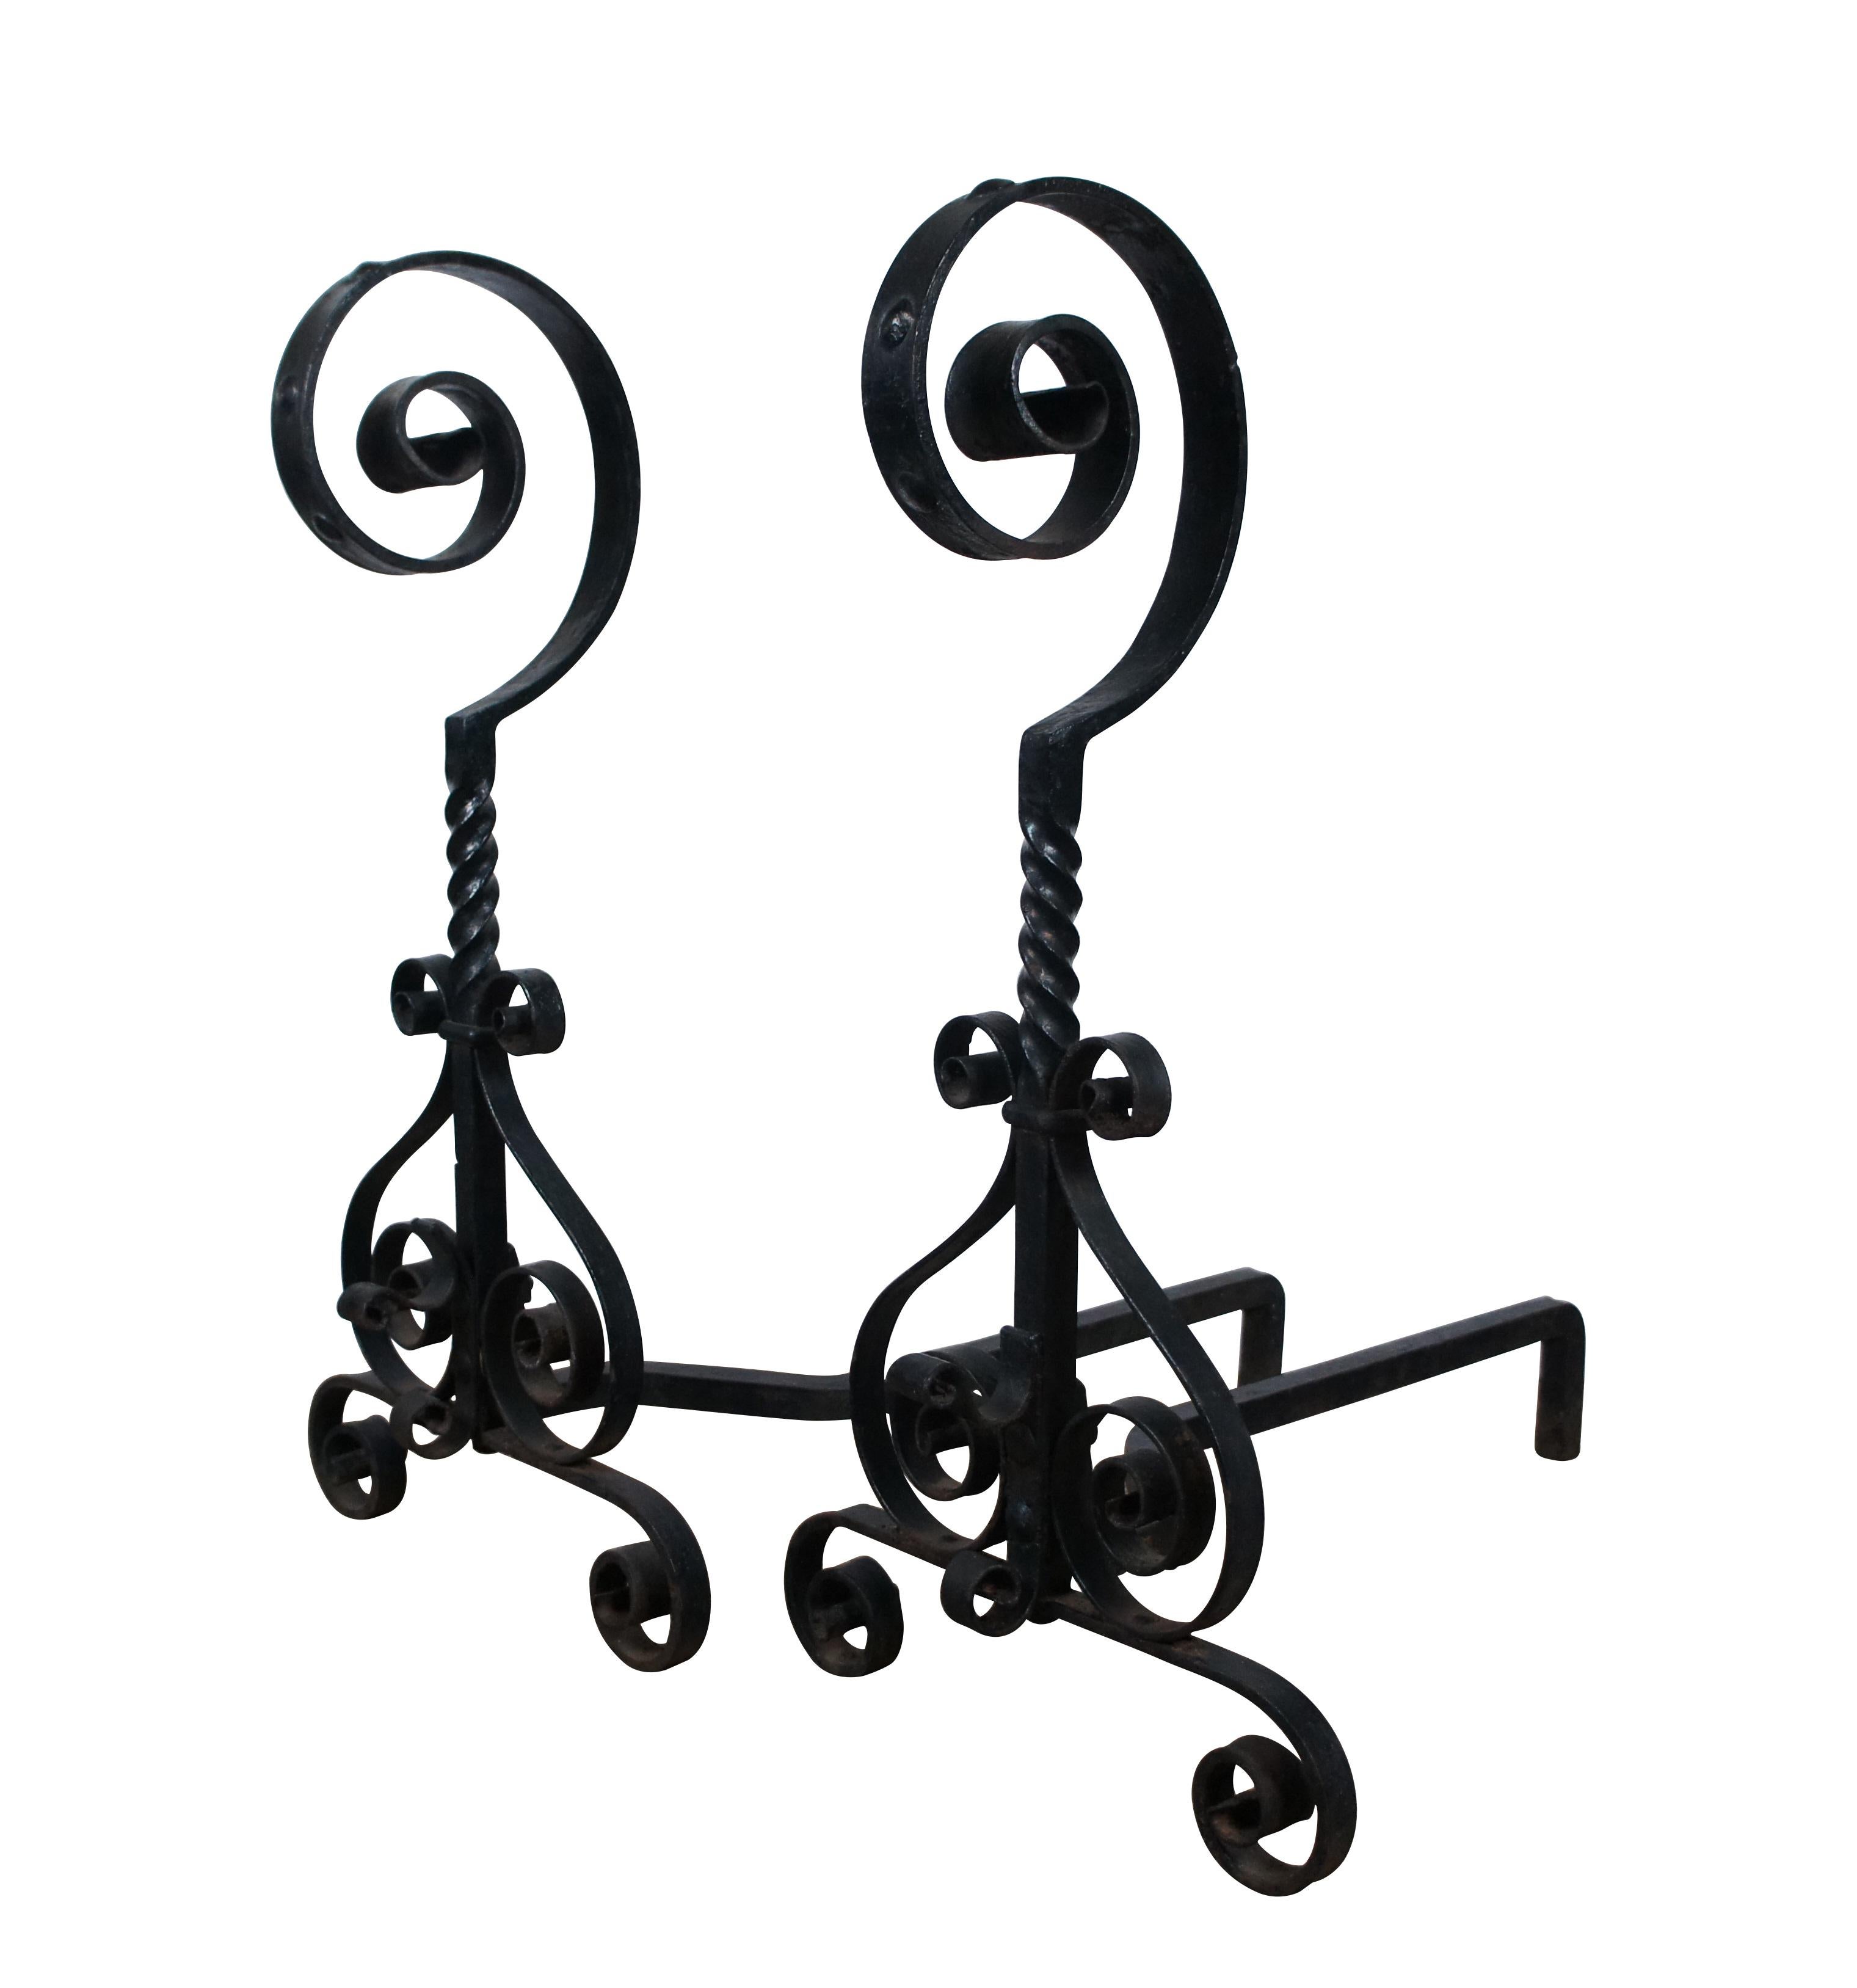 Antique Spanish Revival painted wrought iron andirons / firedogs featuring scrolled bases, twisted mid section and studded spiral tops.

Dimensions:
13